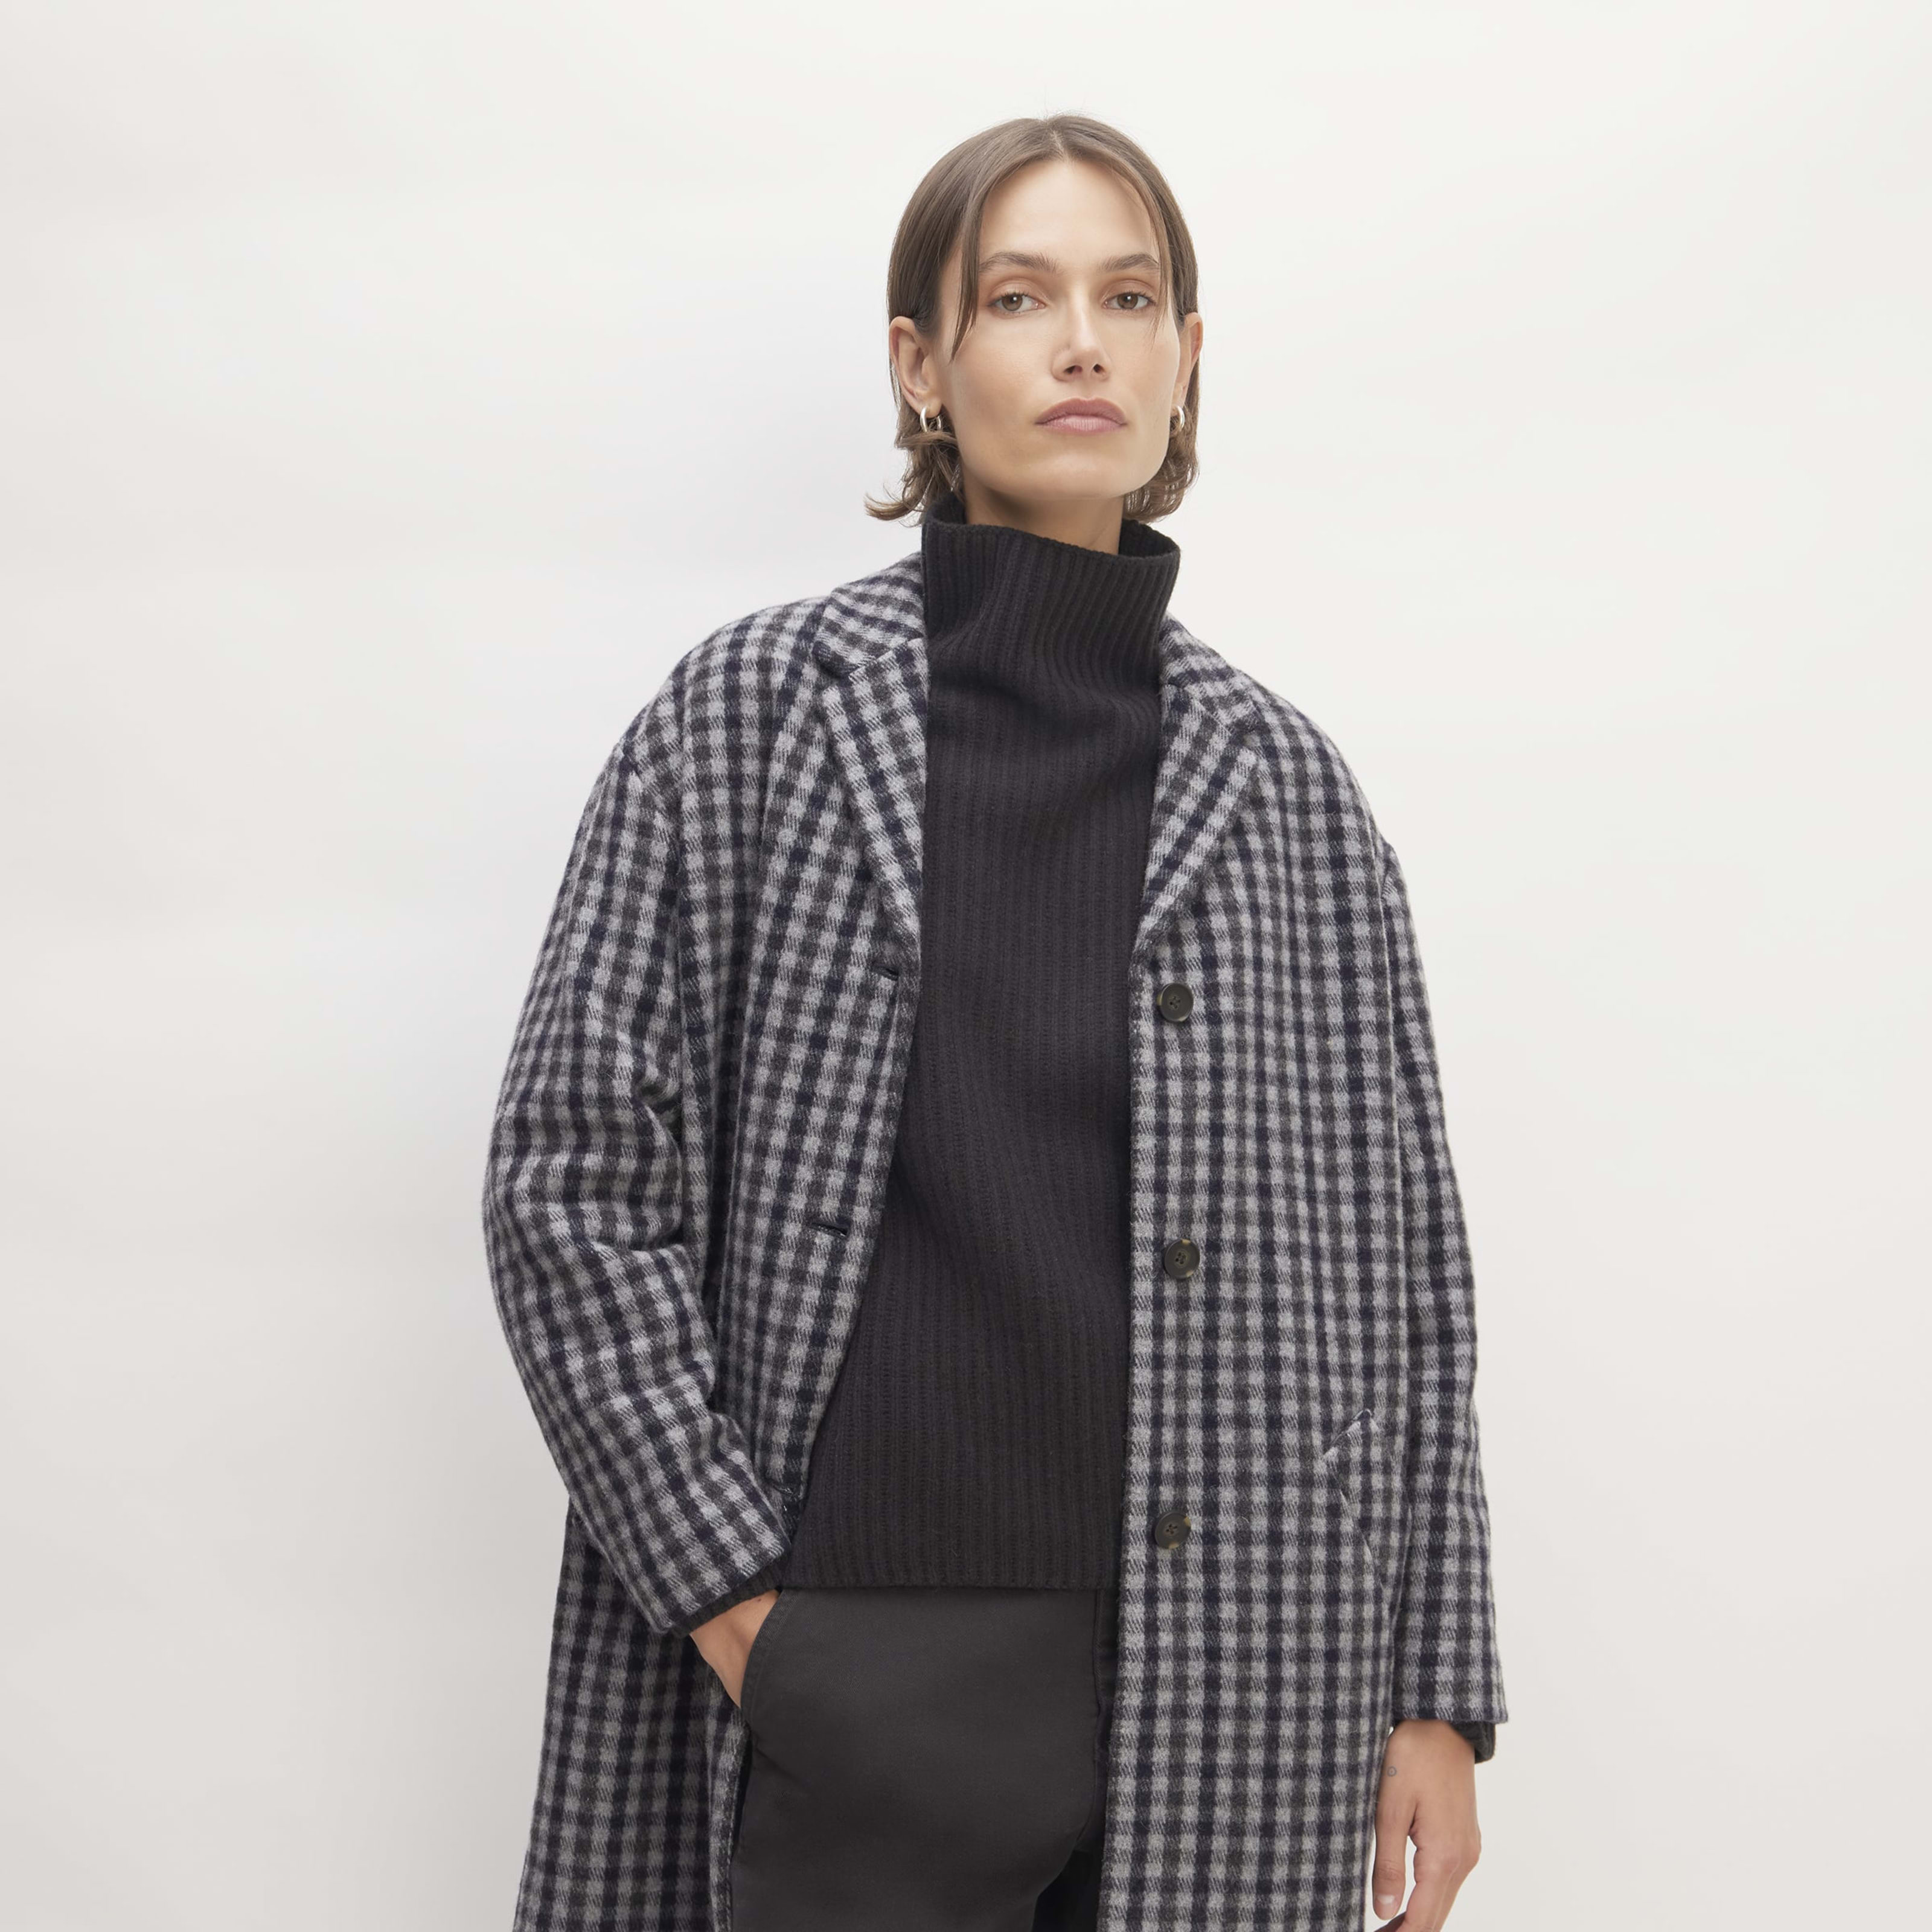 women's italian rewoolâ® cocoon coat by everlane in grey/charcoal/navy check, size xxs